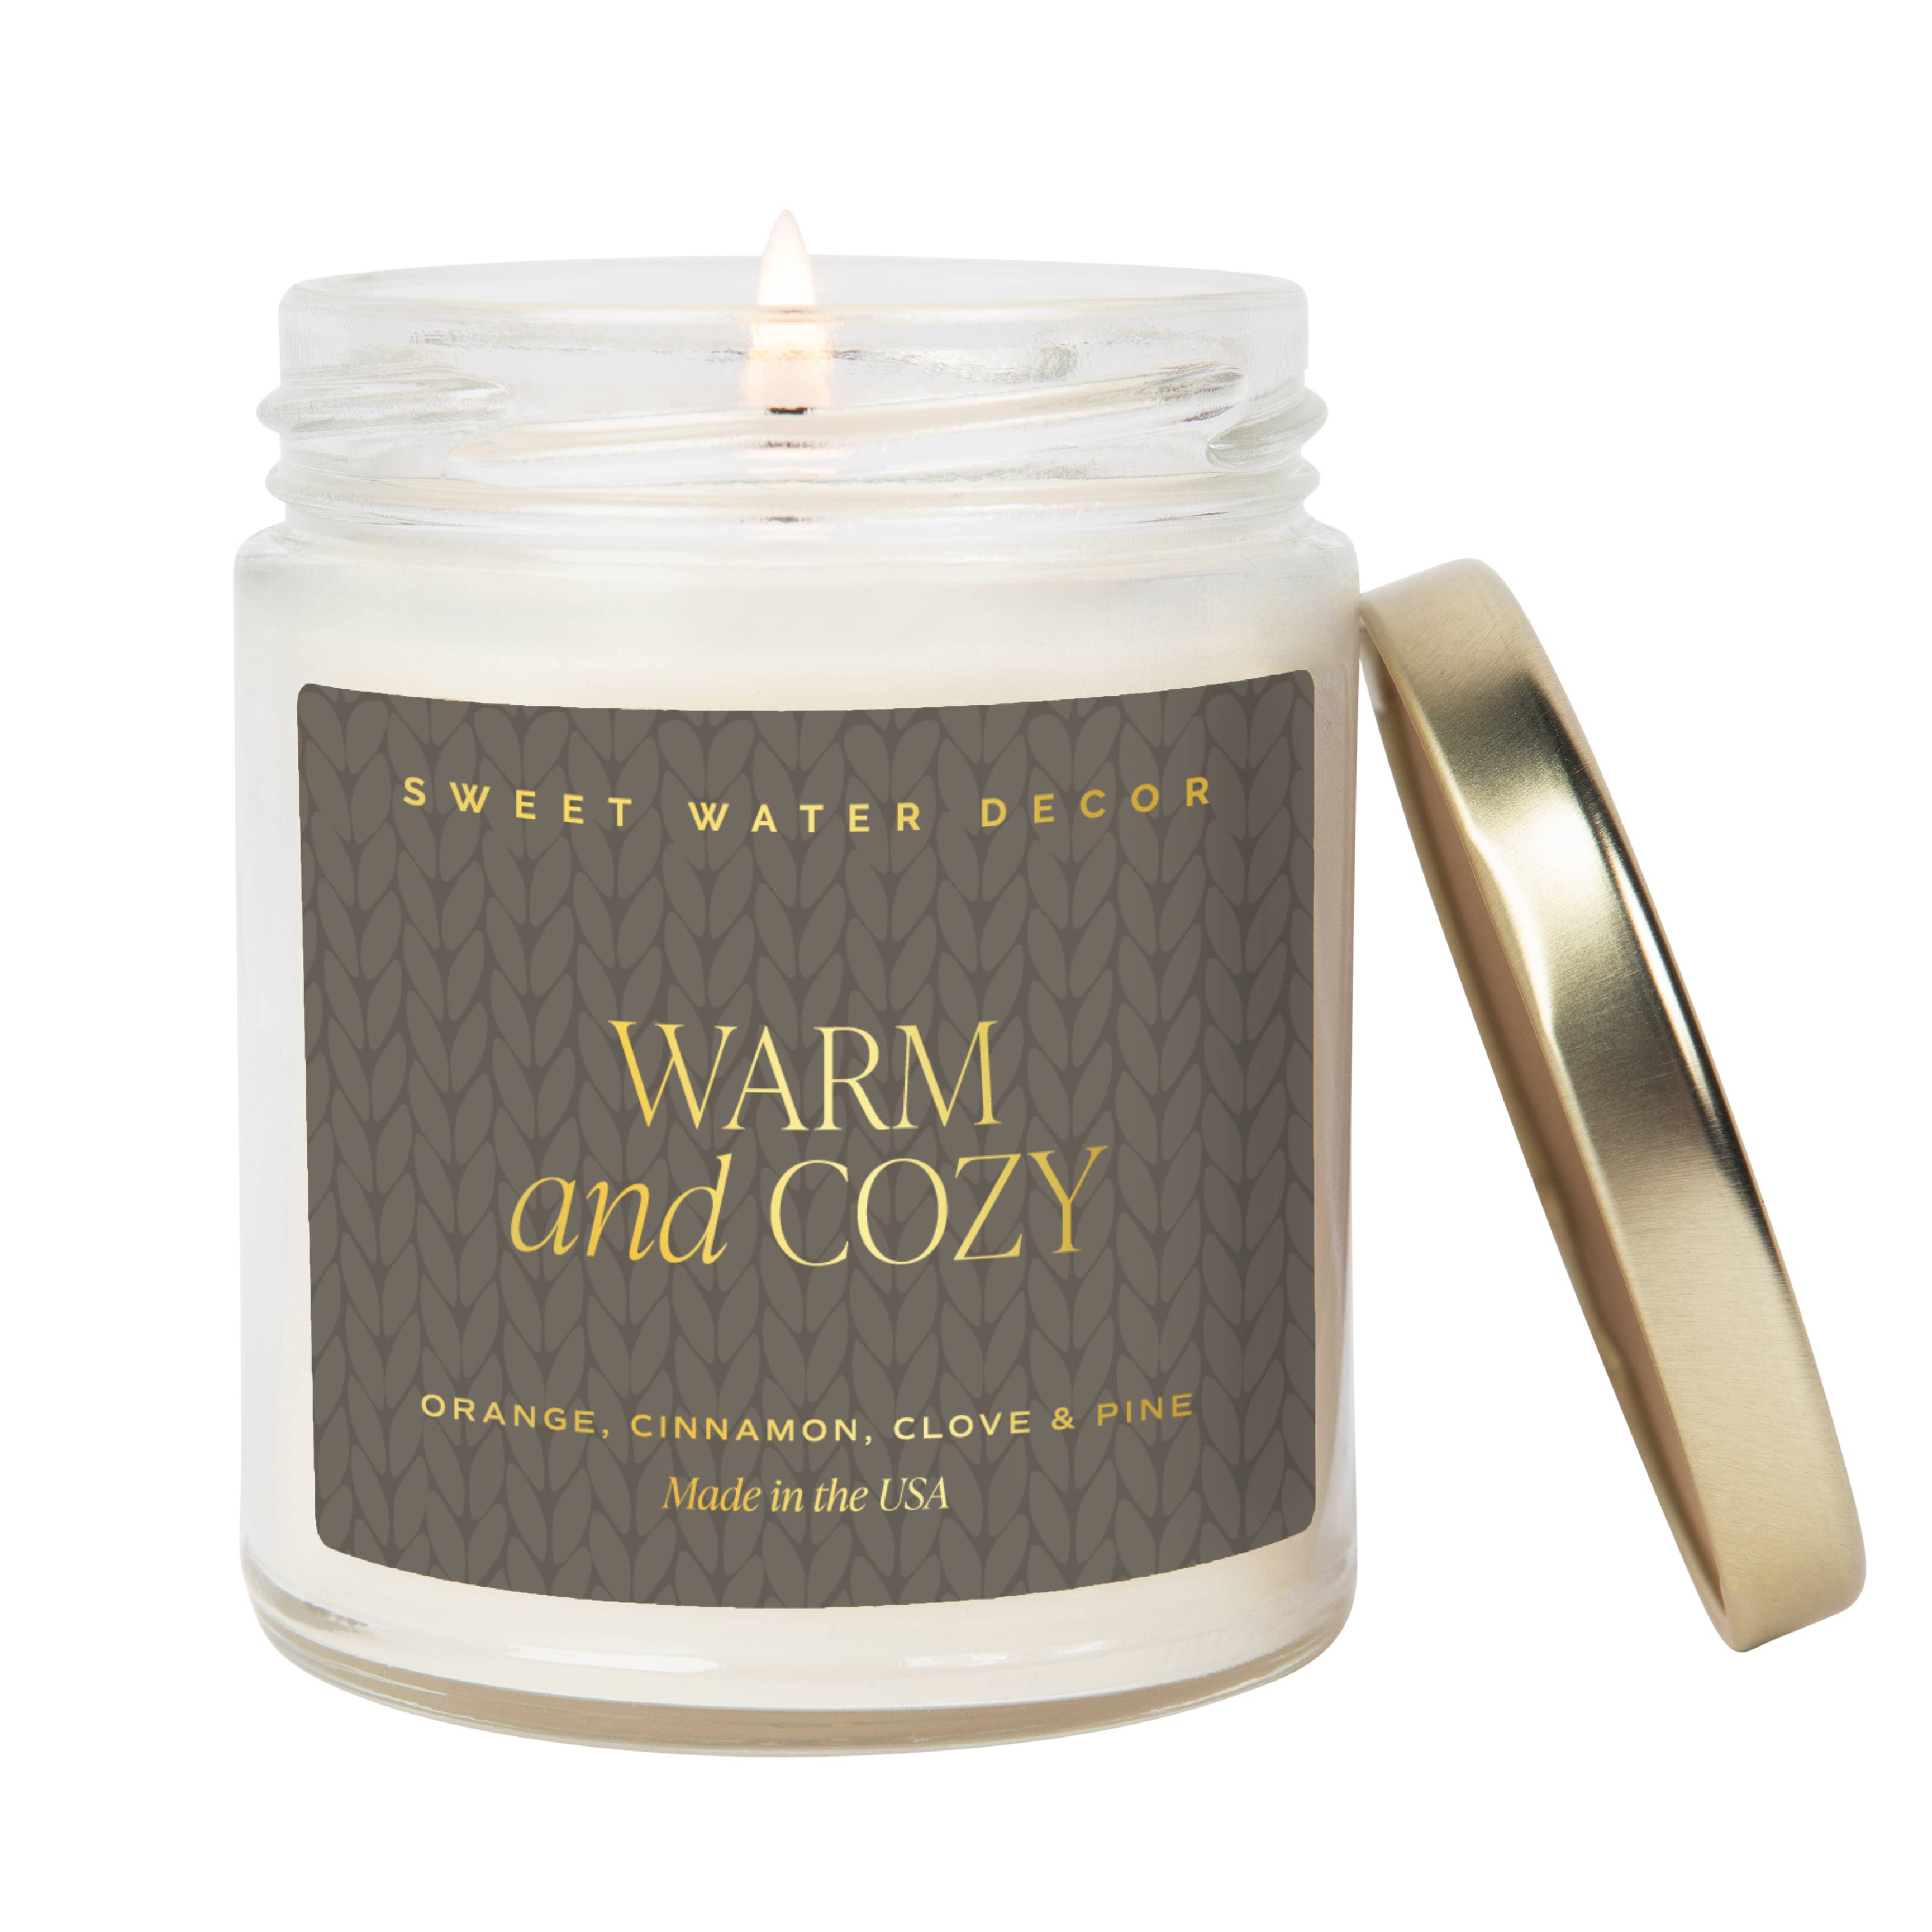 *NEW* Warm and Cozy 9 oz Soy Candle - Home Decor & Gifts